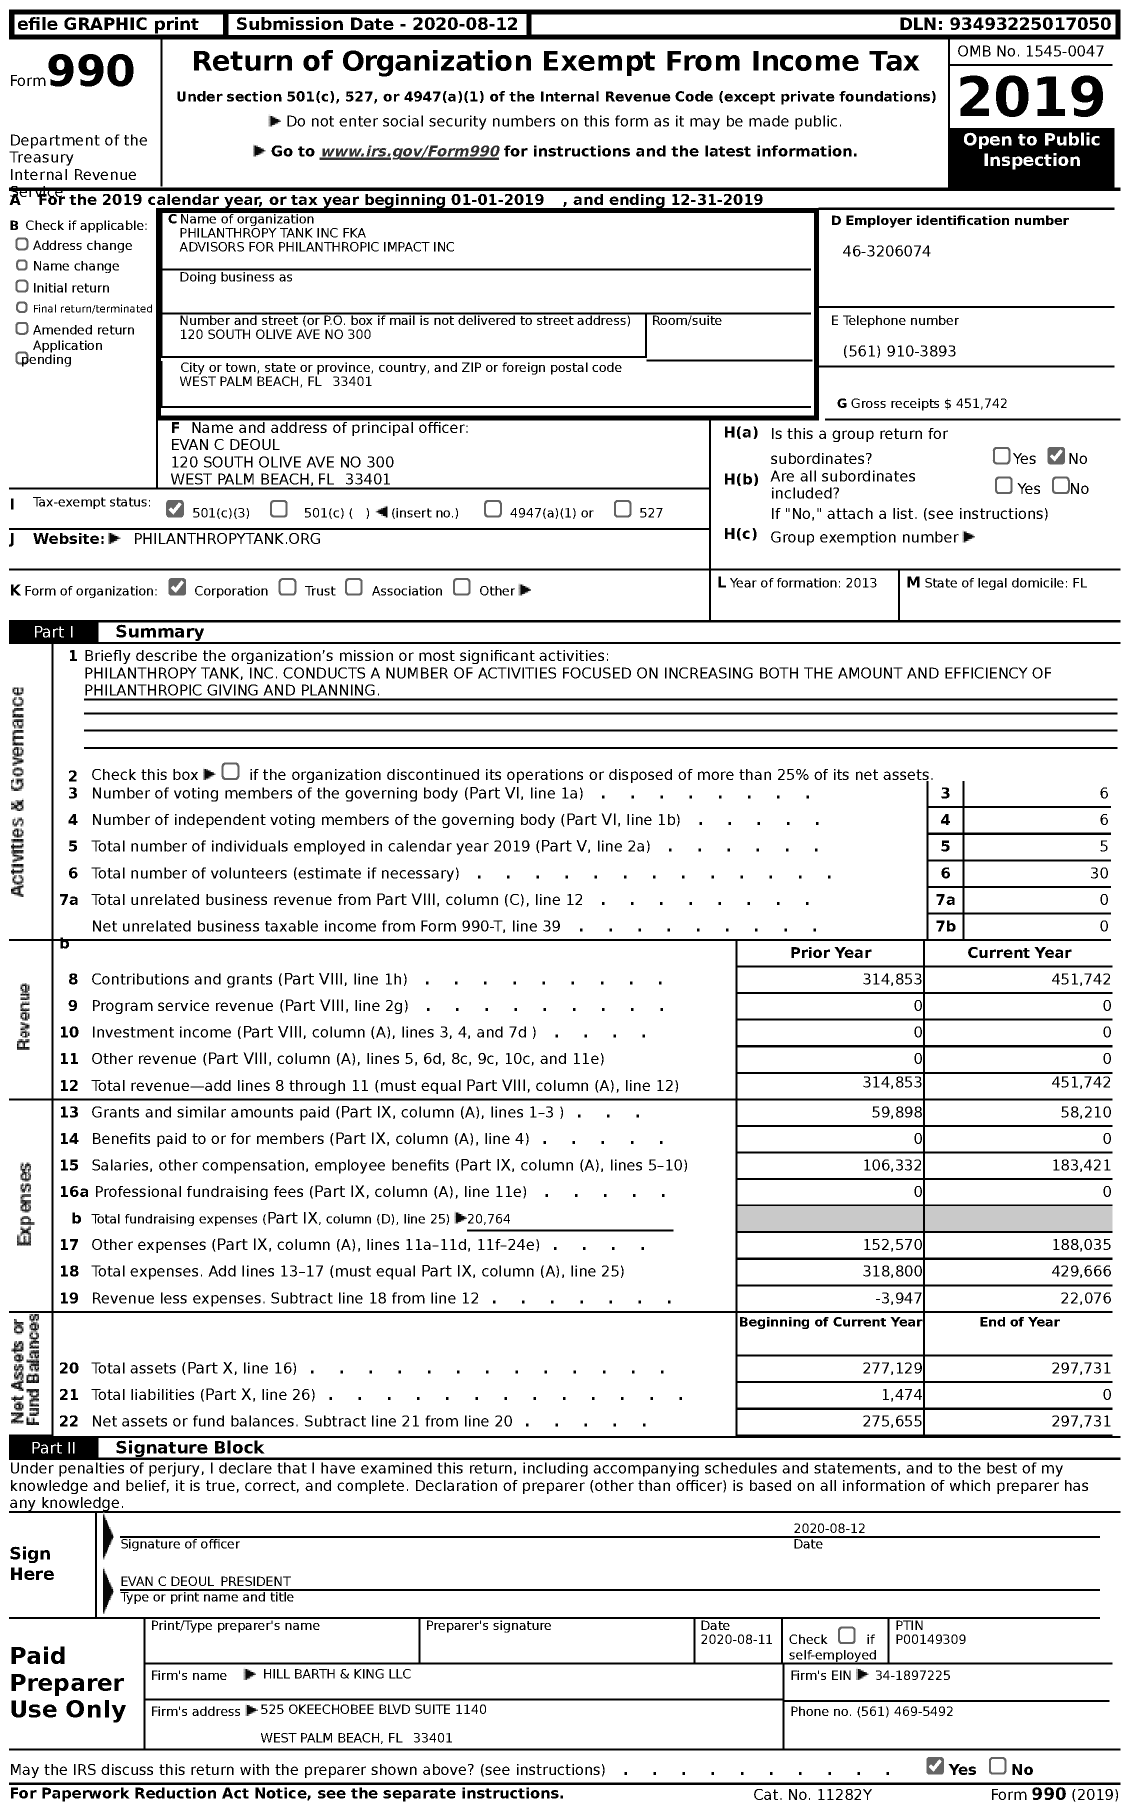 Image of first page of 2019 Form 990 for Philanthropy Tank